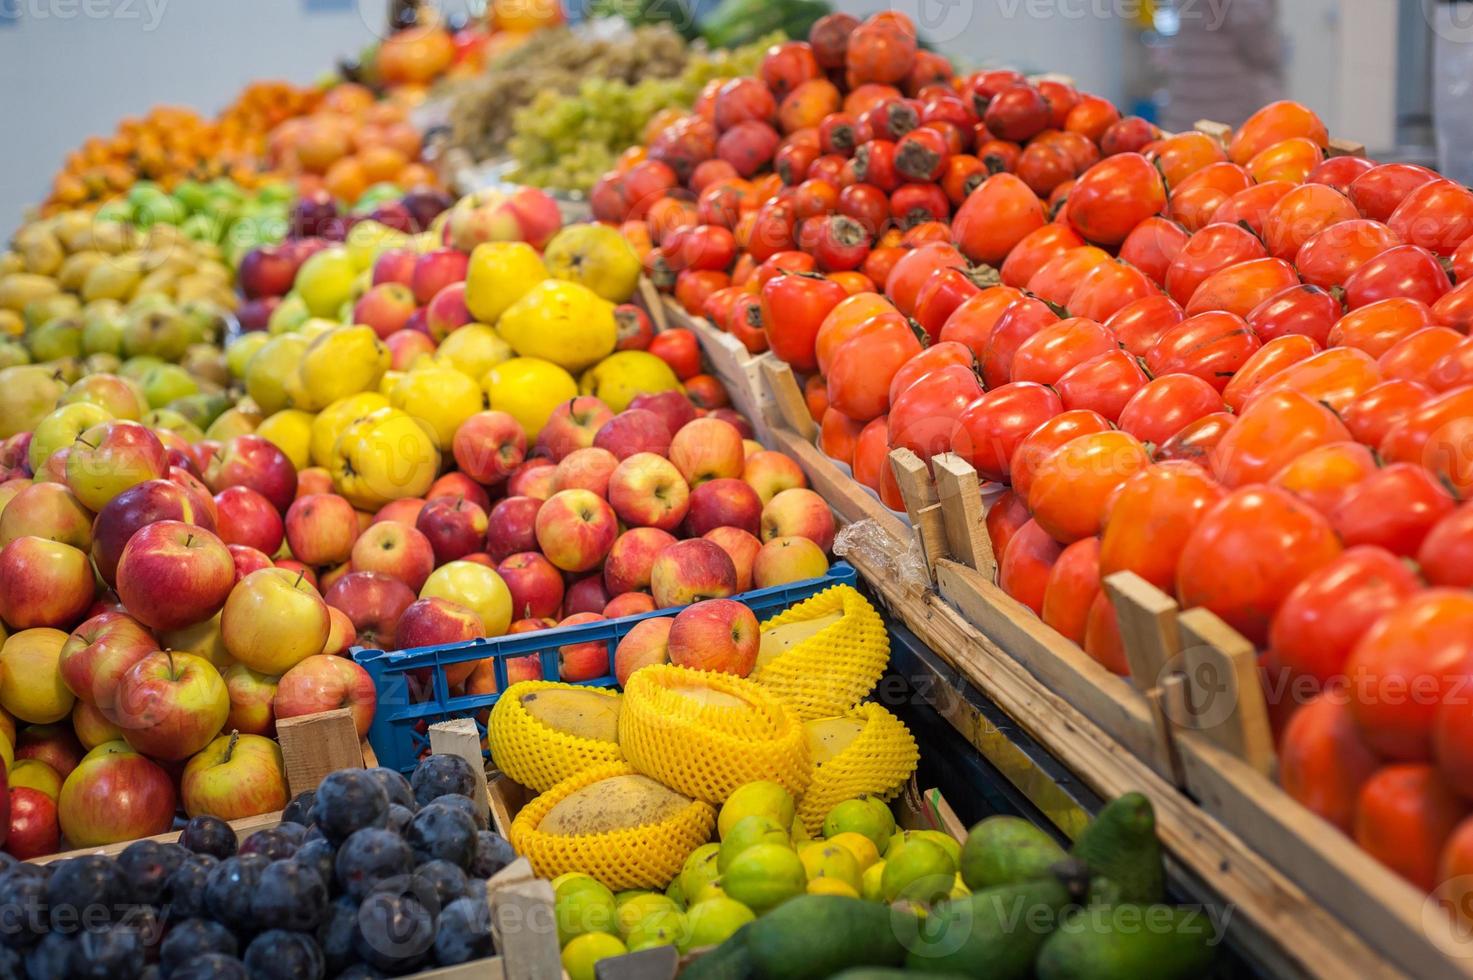 Fruit market with various colorful fresh fruits and vegetables photo